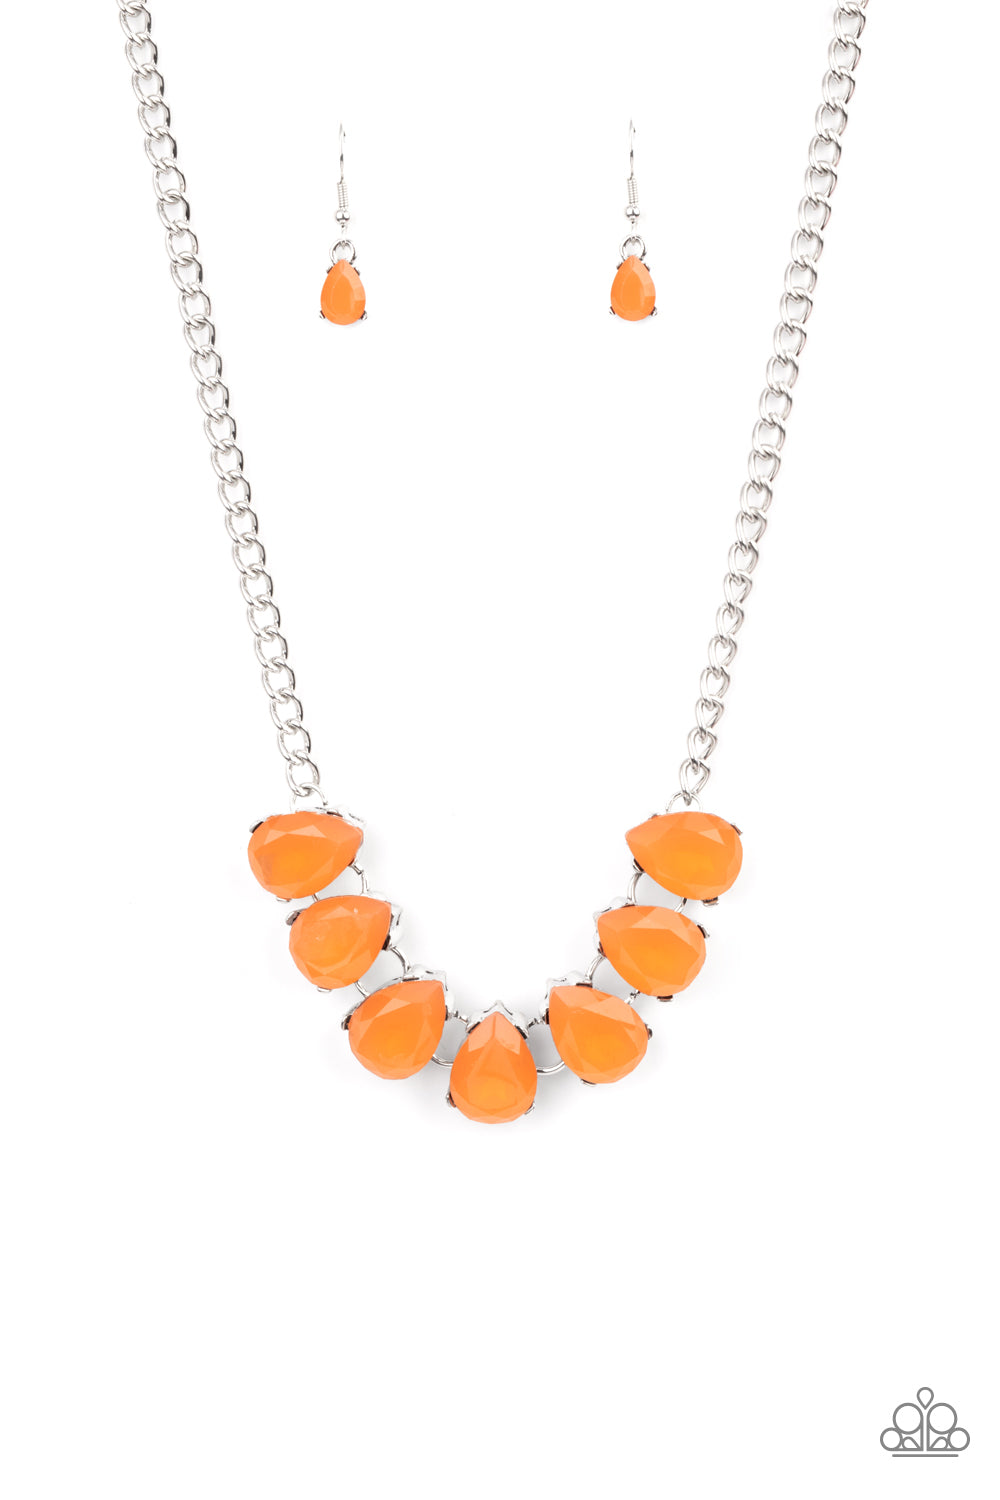 Paparazzi - Above The Clouds - Orange Necklace